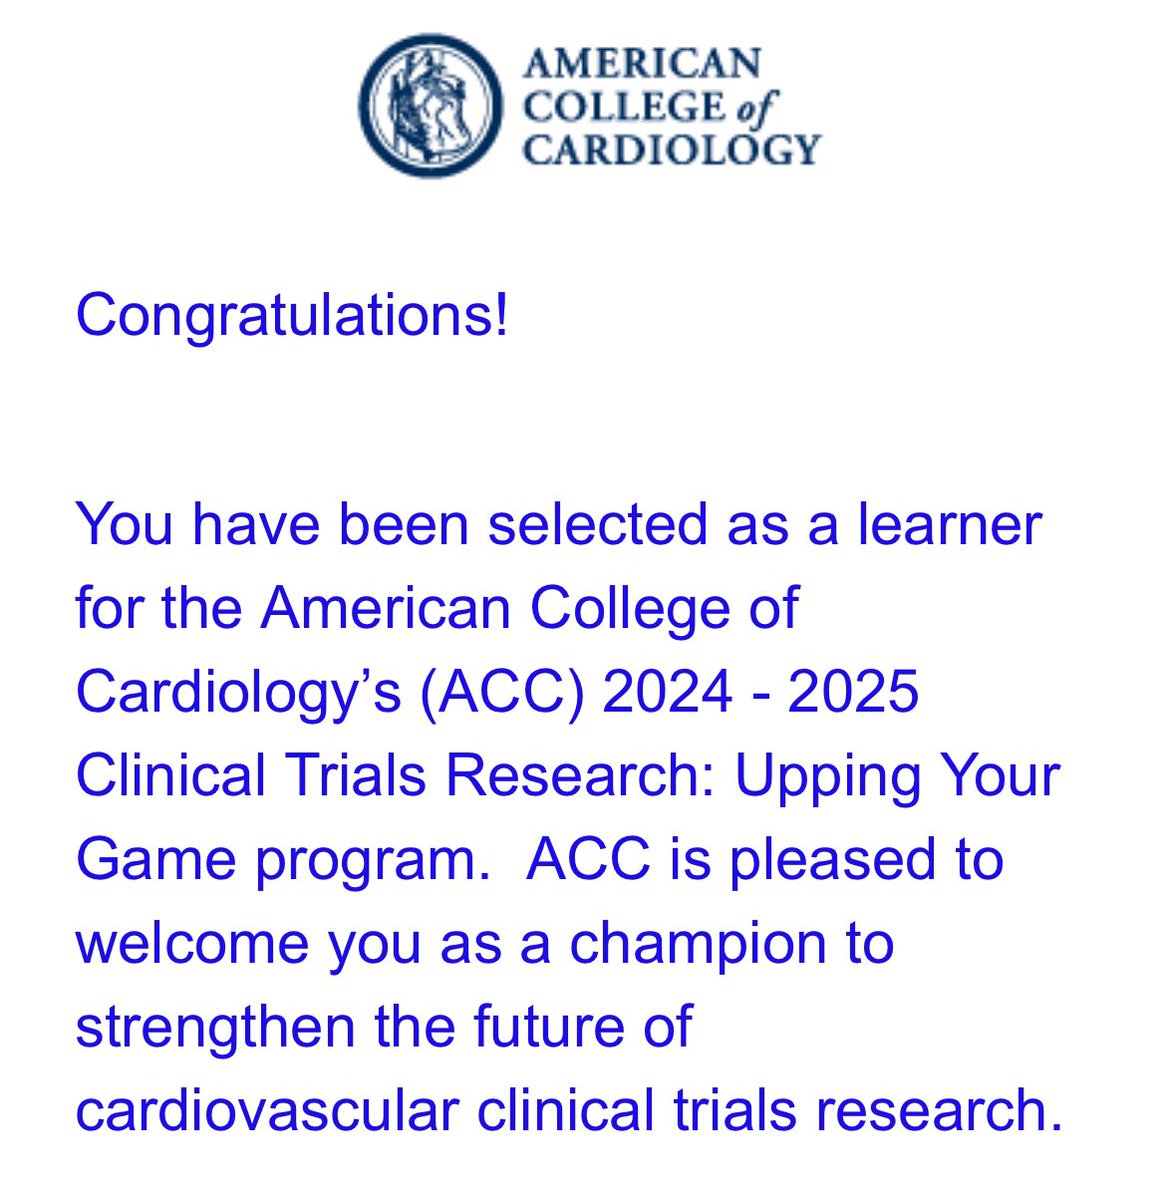 Thrilled to have been accepted to the @ACCinTouch Clinical Trials Research Program. Forever grateful to @athenapoppas & @JDawnAbbott1 for their sponsorship & excited to learn from incredible peers & faculty. @_WayneBatchelor @TYWangMD @Drroxmehran @pamelasdouglas @MelvinEchols9